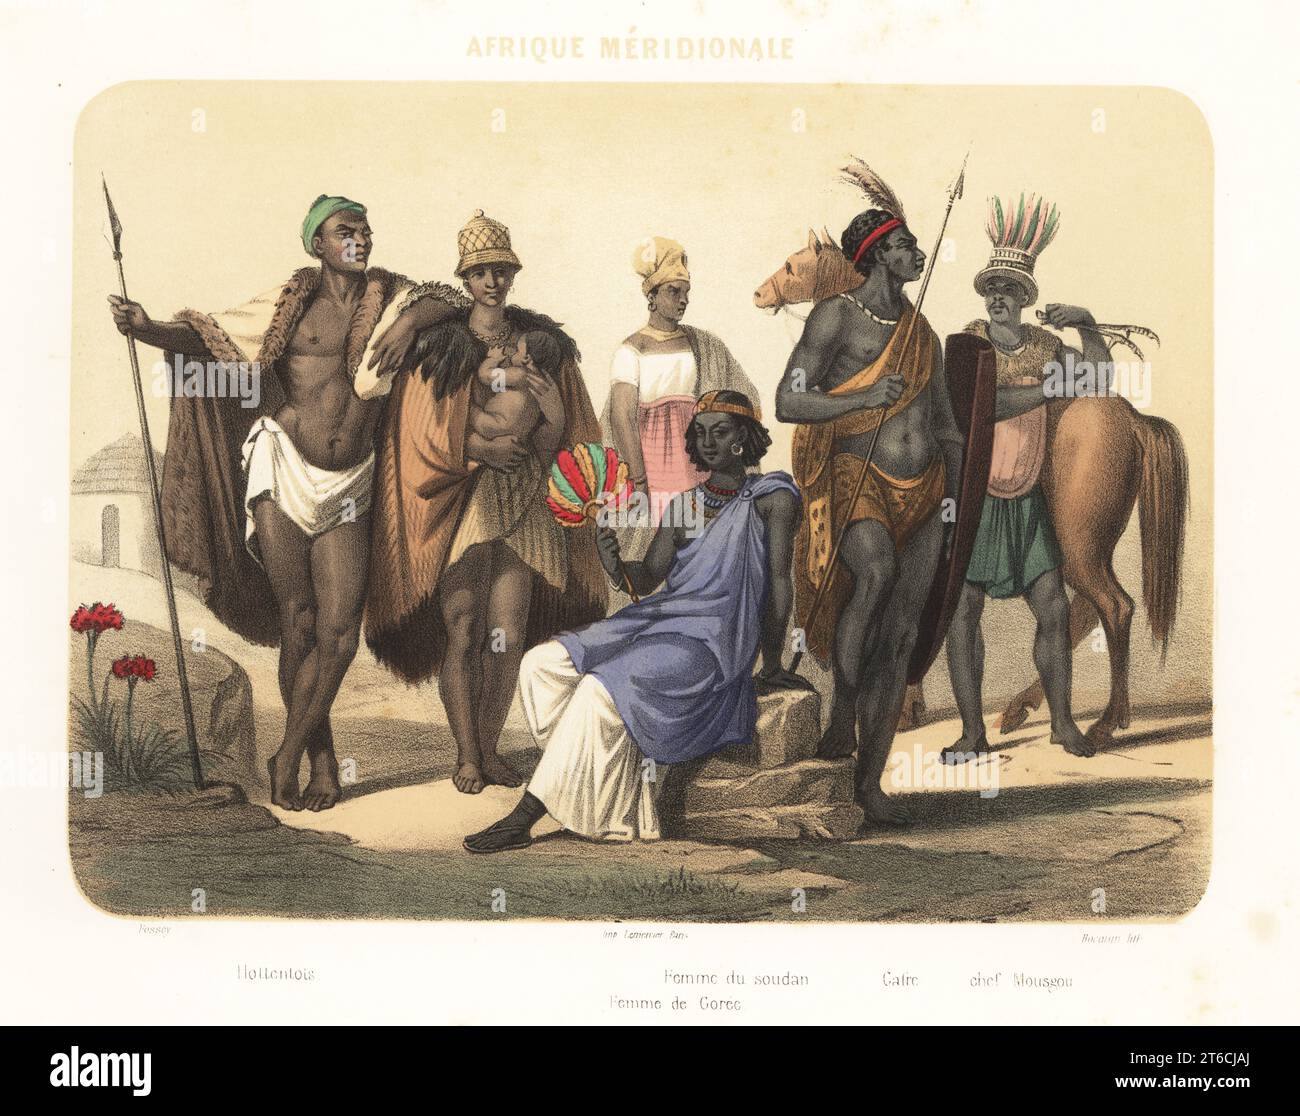 Costumes of Africa, 1858. Khoikhoi man and woman with sheepskin cloaks, woman from Sudan, Signare woman from the slave-trading Ile de Goree (Senegal), Zulu warrior with assegai spear and isihlangu cow-hide shield, and Musgum chief in feather headdress with ostrich bones (Cameroon). Hottentots, femme de Soudan, femme de Goree, Caffre, chef Mousgou. Handcoloured and sepia-tinted lithograph by Jean-Adolphe Bocquin after an illustration by Felix Fossey from Elisabeth Muller (pseudonym of Leonie Bedelet)s Le Monde en Estampes, The World in Prints, Amadee Bedelet, Paris, 1858. Stock Photo